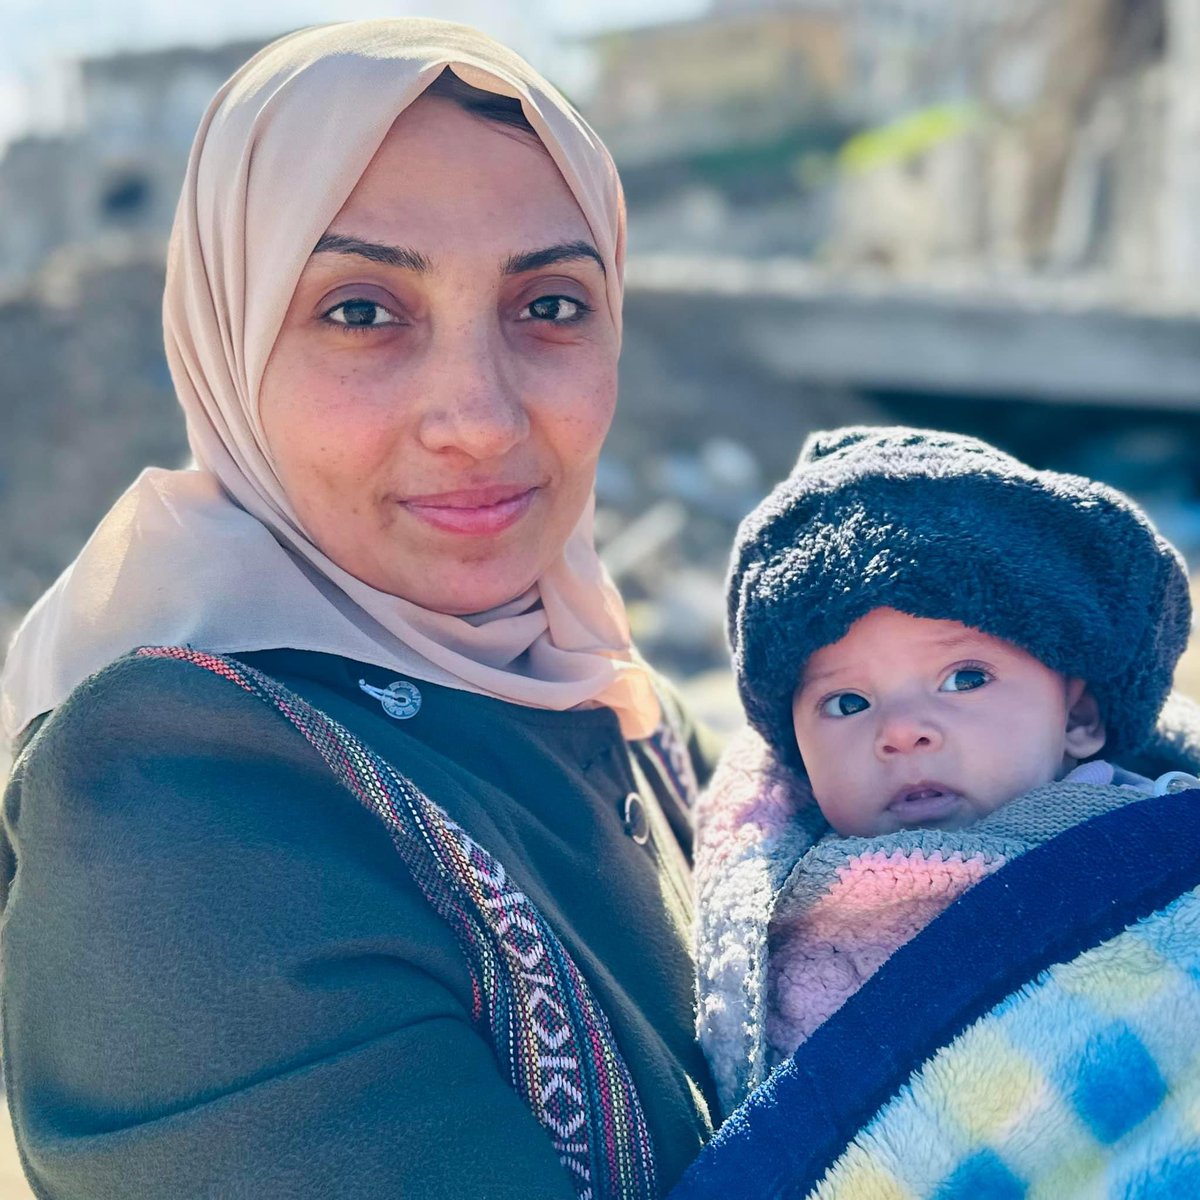 BREAKING| Israel's military kills journalist and author Amina Hmeid along with her child in a strike on her house in Al Shate' refugee camp in western Gaza.